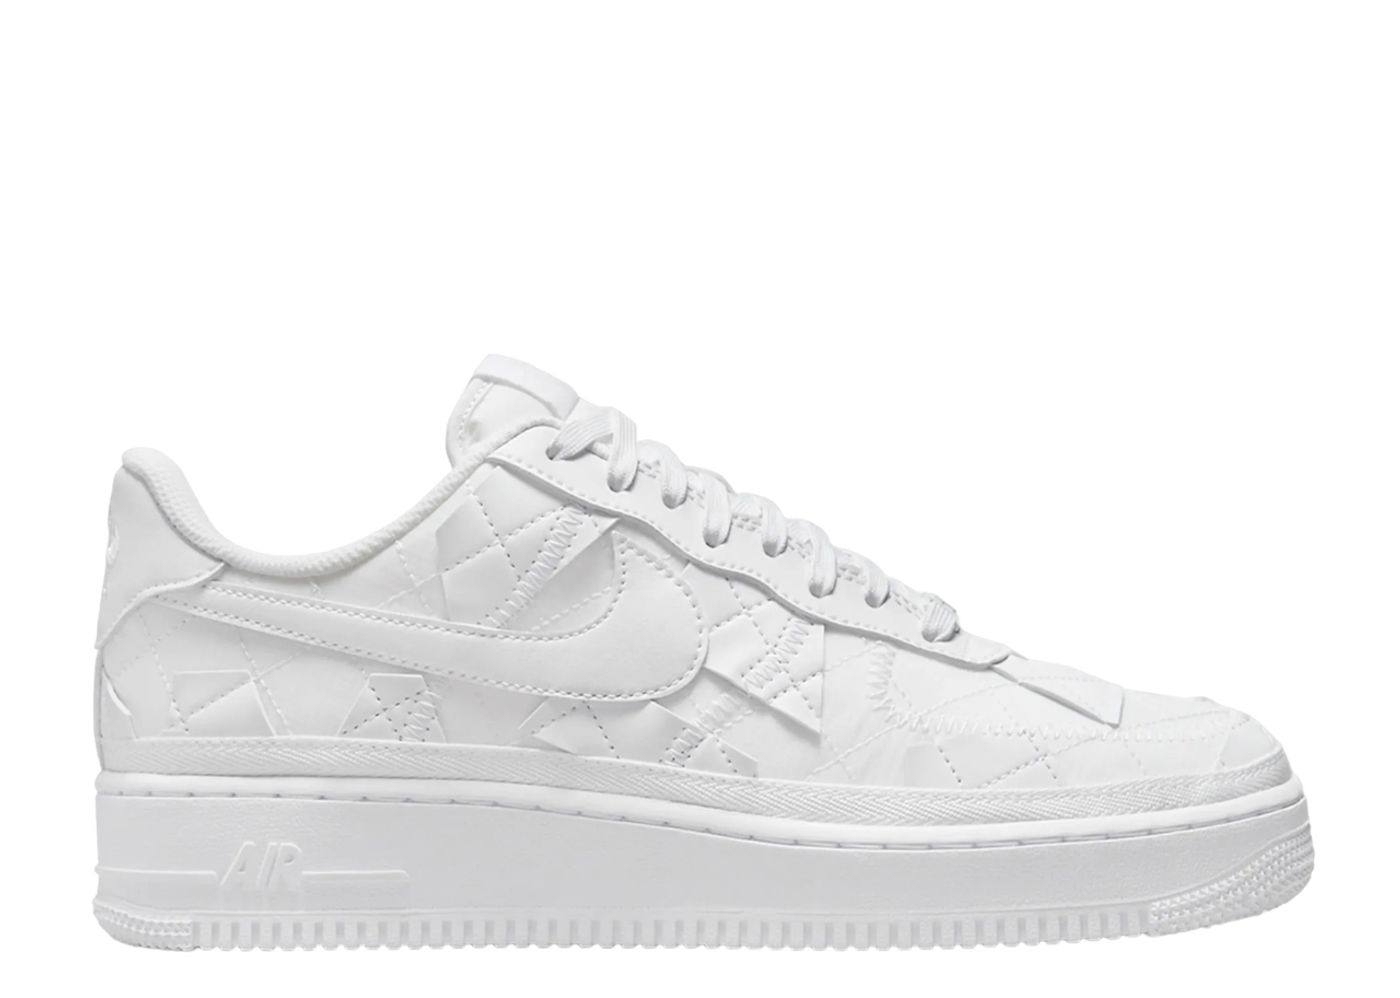 Nike Air Force 1 07 LV8 White for Sale, Authenticity Guaranteed